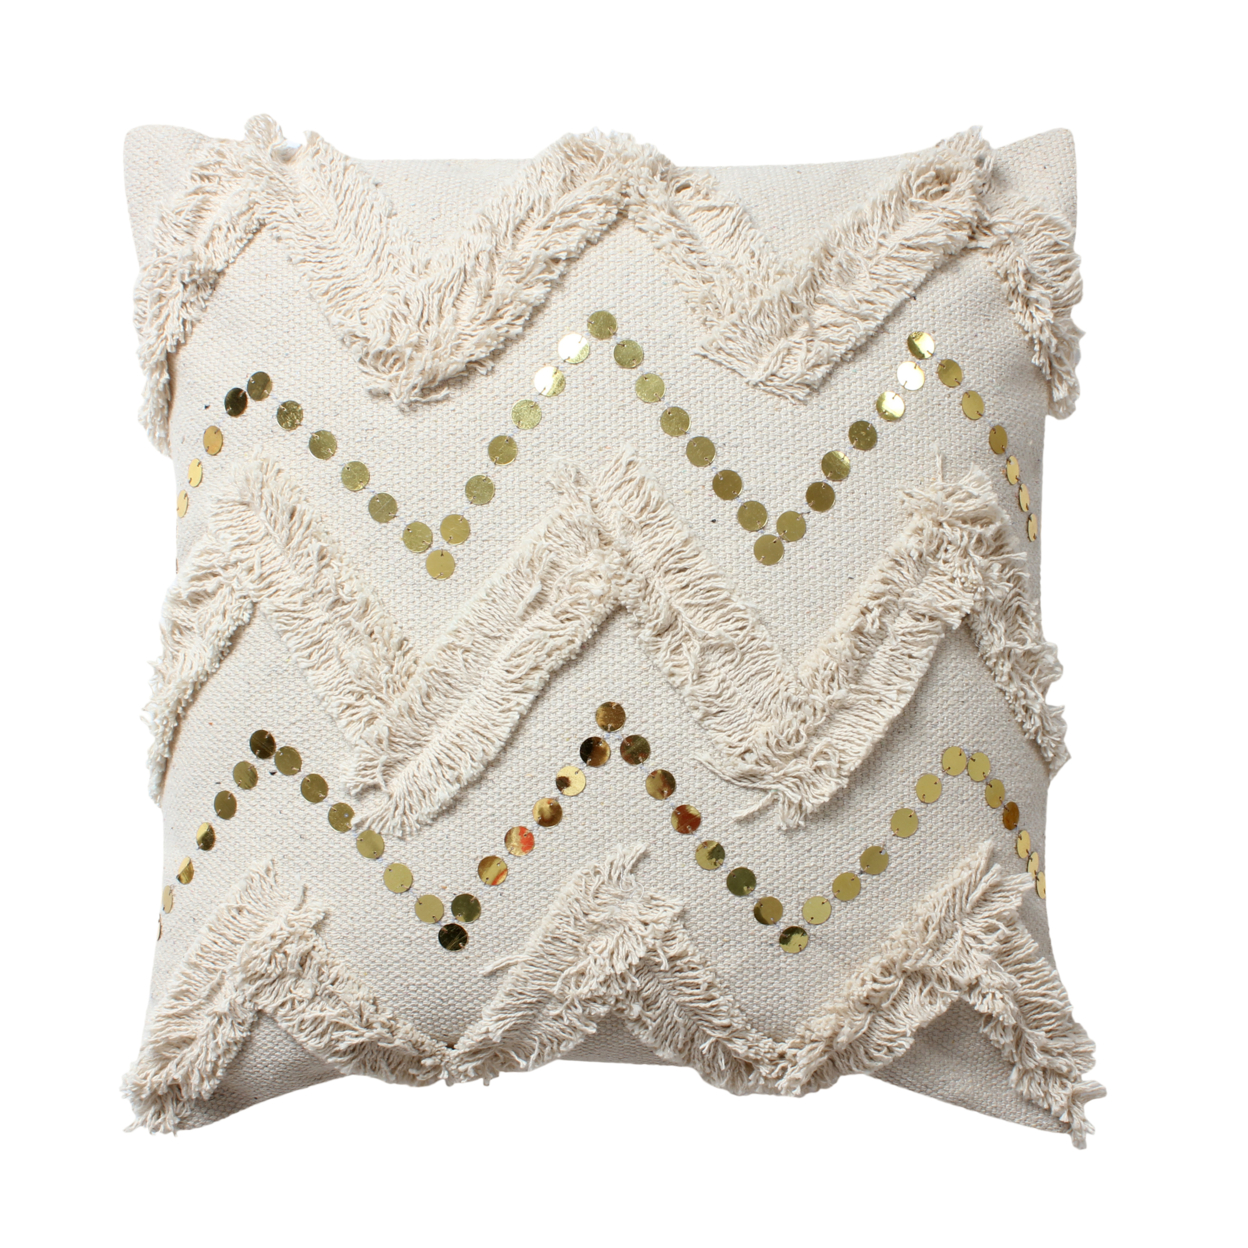 18 X 18 Square Polycotton Handwoven Accent Throw Pillow, Fringed, Sequins, Chevron Design, Set Of 2, Off White